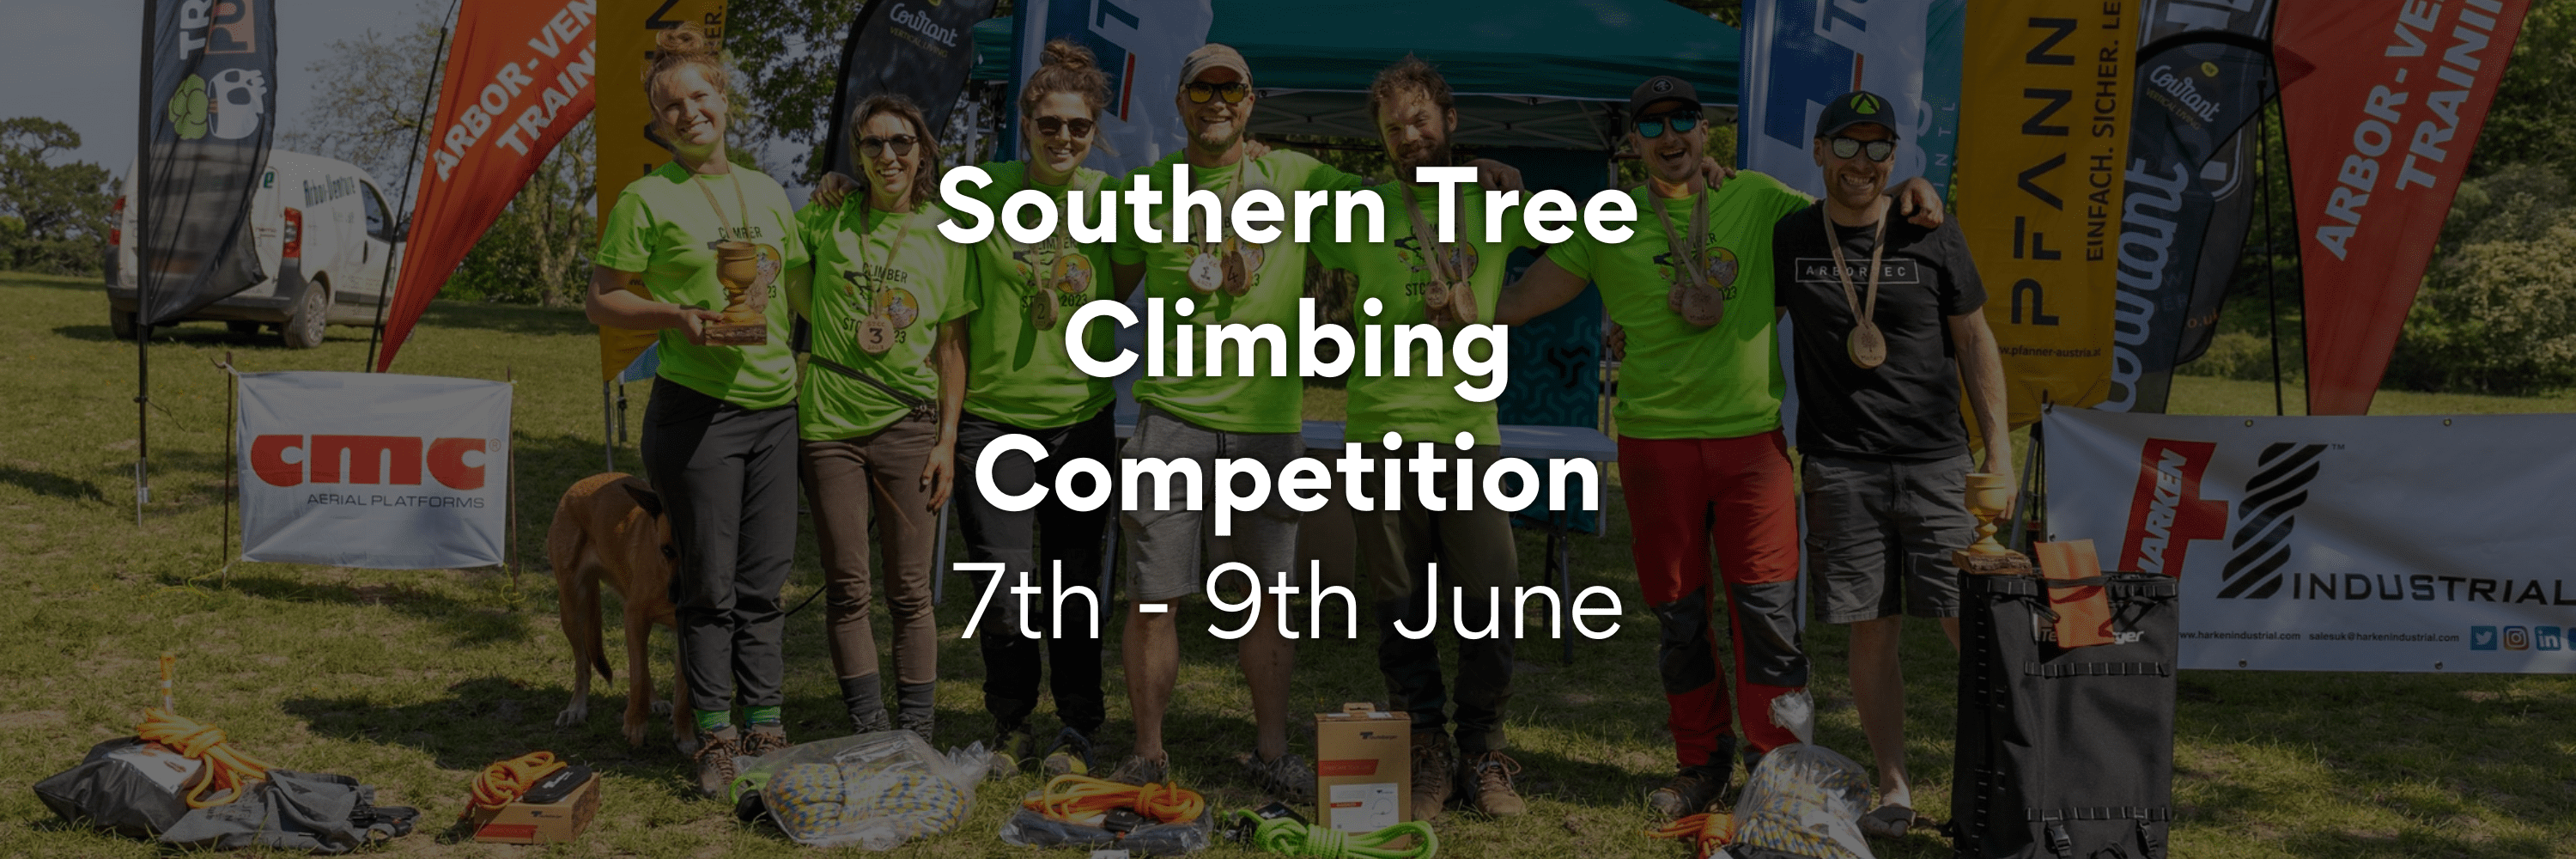 Southern tree Climbing Competition